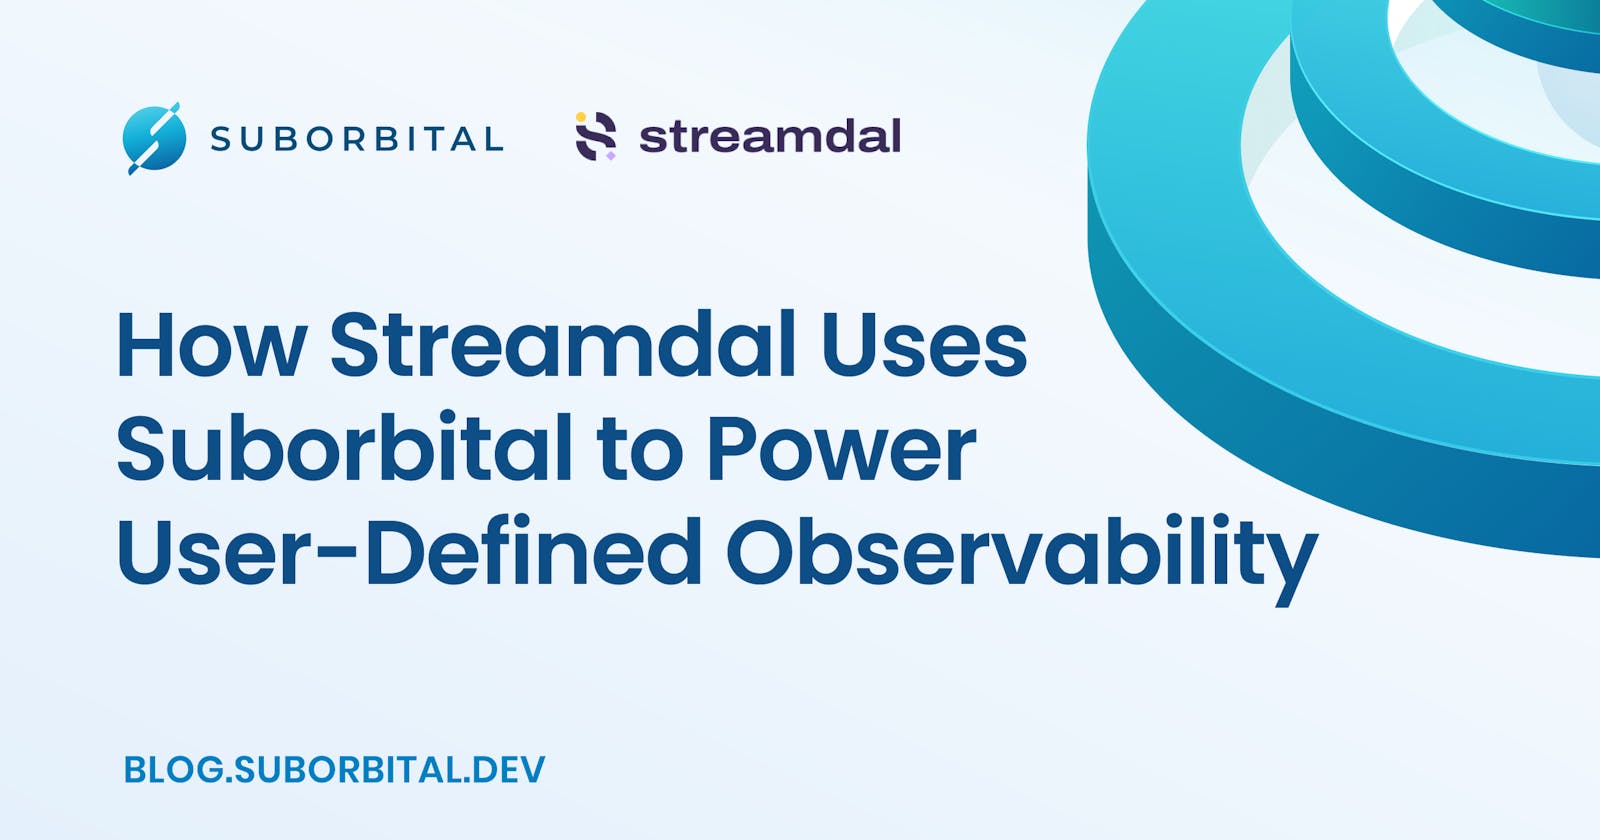 Case Study: How Streamdal Uses Suborbital to Power User-Defined Observability